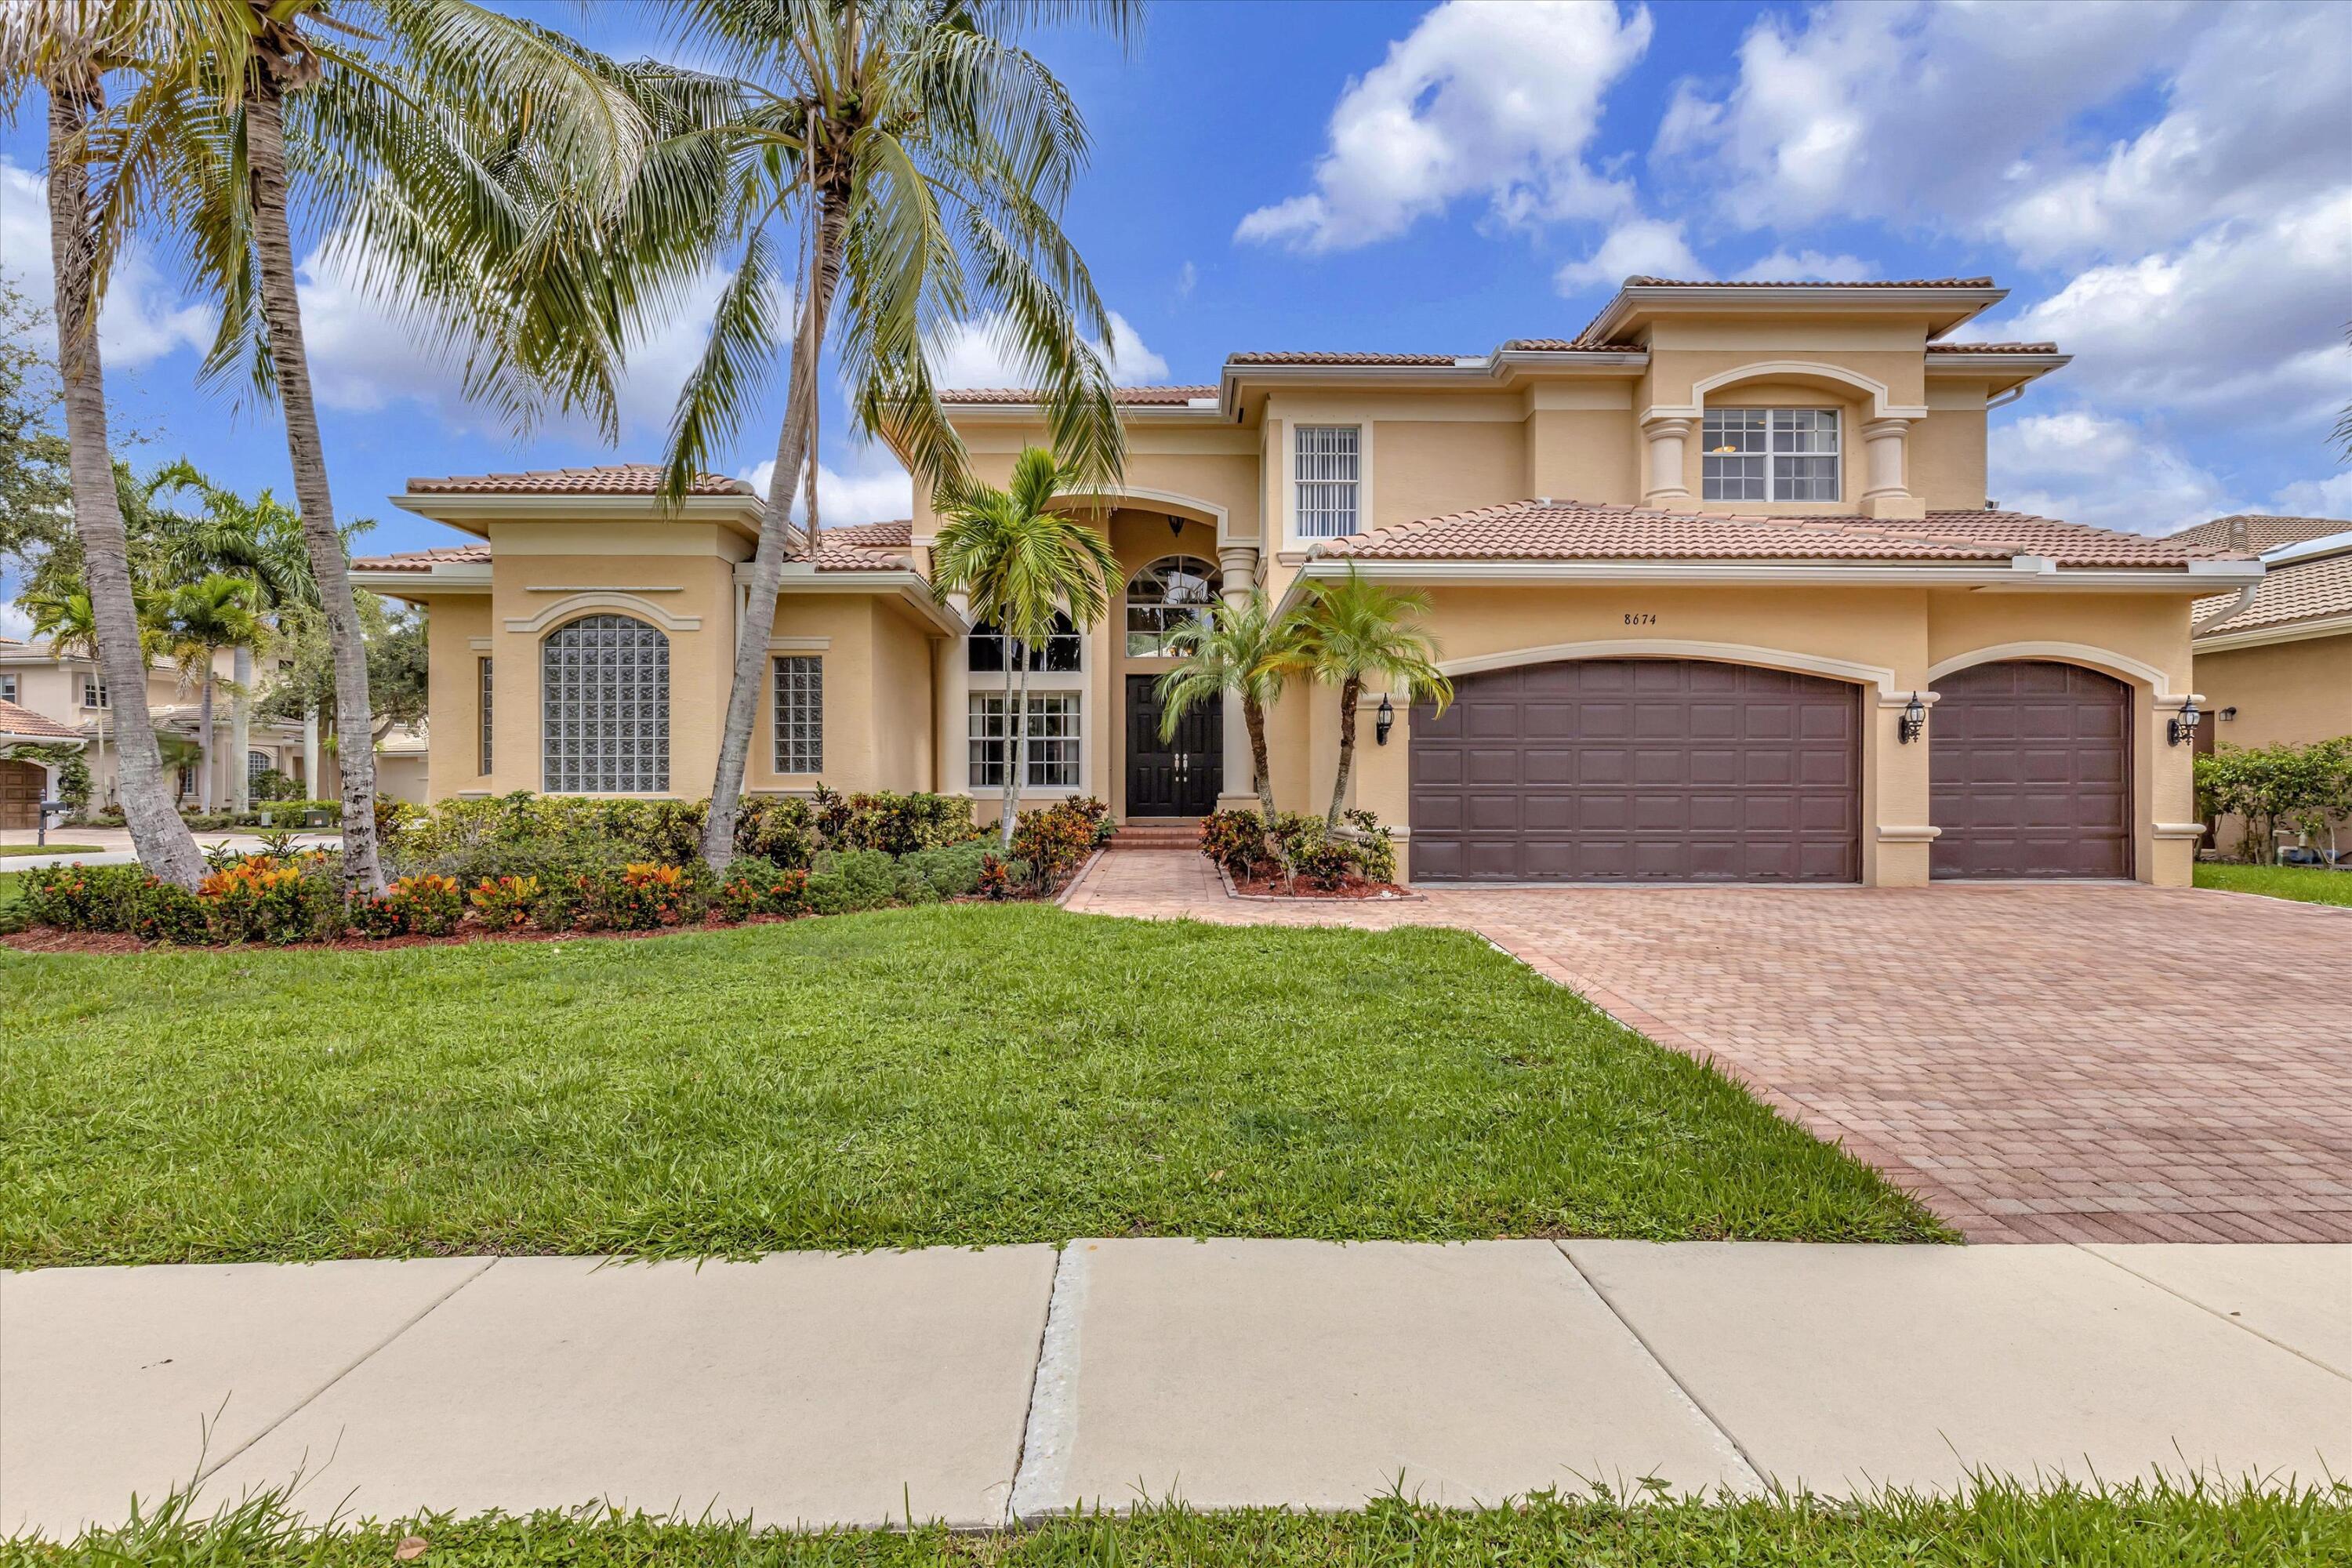 8674 Yellow Rose Court, Boynton Beach, Florida, 33473, United States, 5 Bedrooms Bedrooms, ,5 BathroomsBathrooms,Residential,For Sale,8674 Yellow Rose Court,1474070